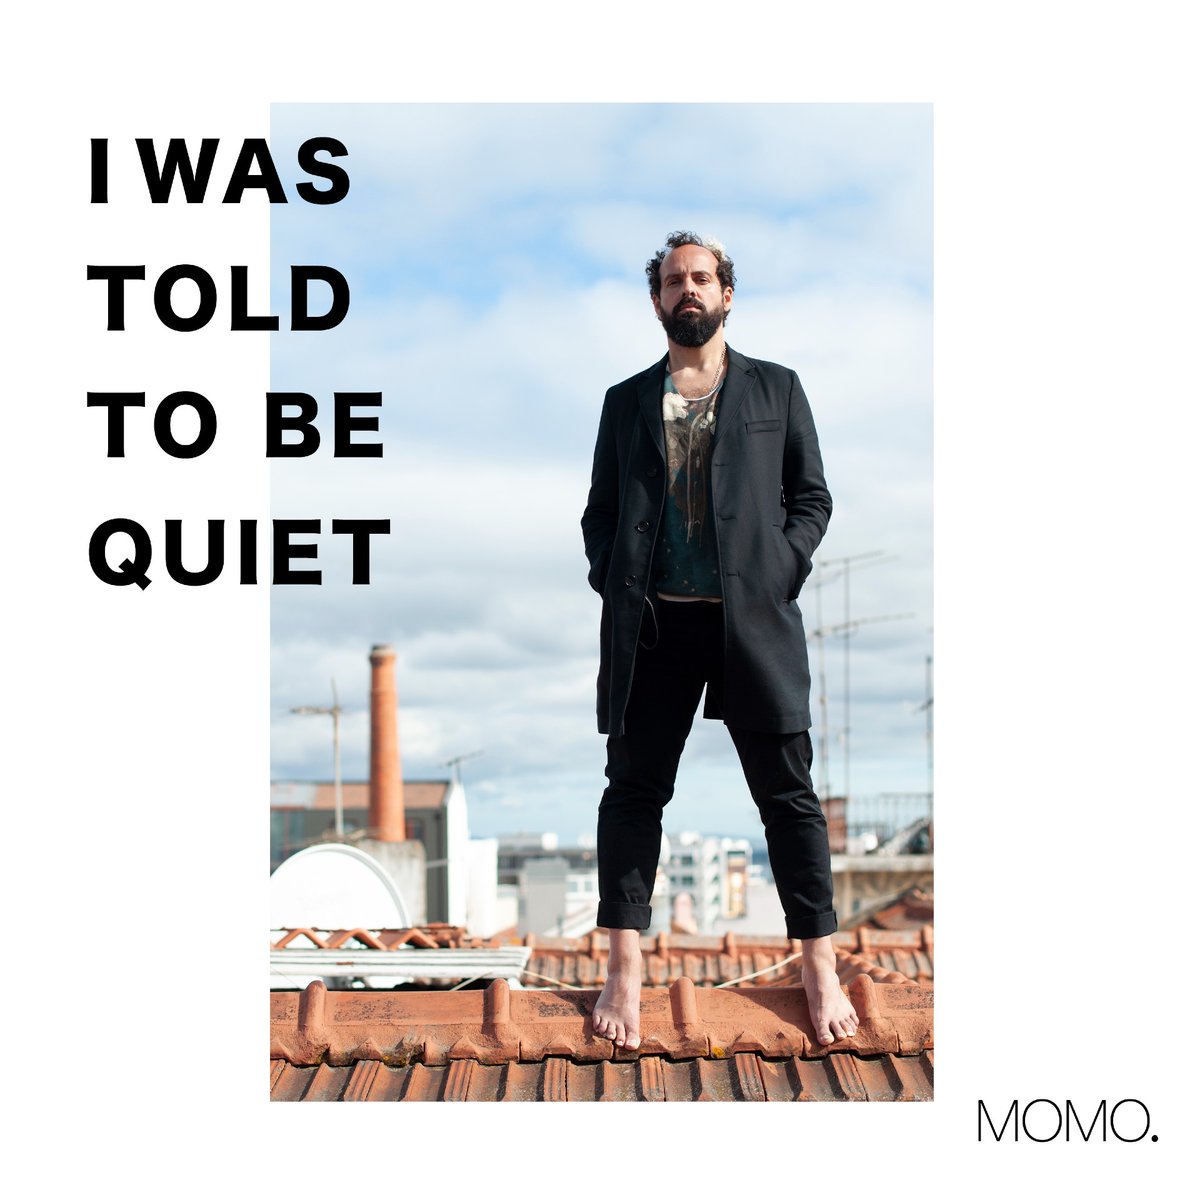 More traditional than modern, there’s a charming allure, a cultured feel, to the songs on #MOMO.’s I Was Told to Be Quiet. Vinyl out now via #YellowRacketRecords. v13.net/2022/10/momo-i…